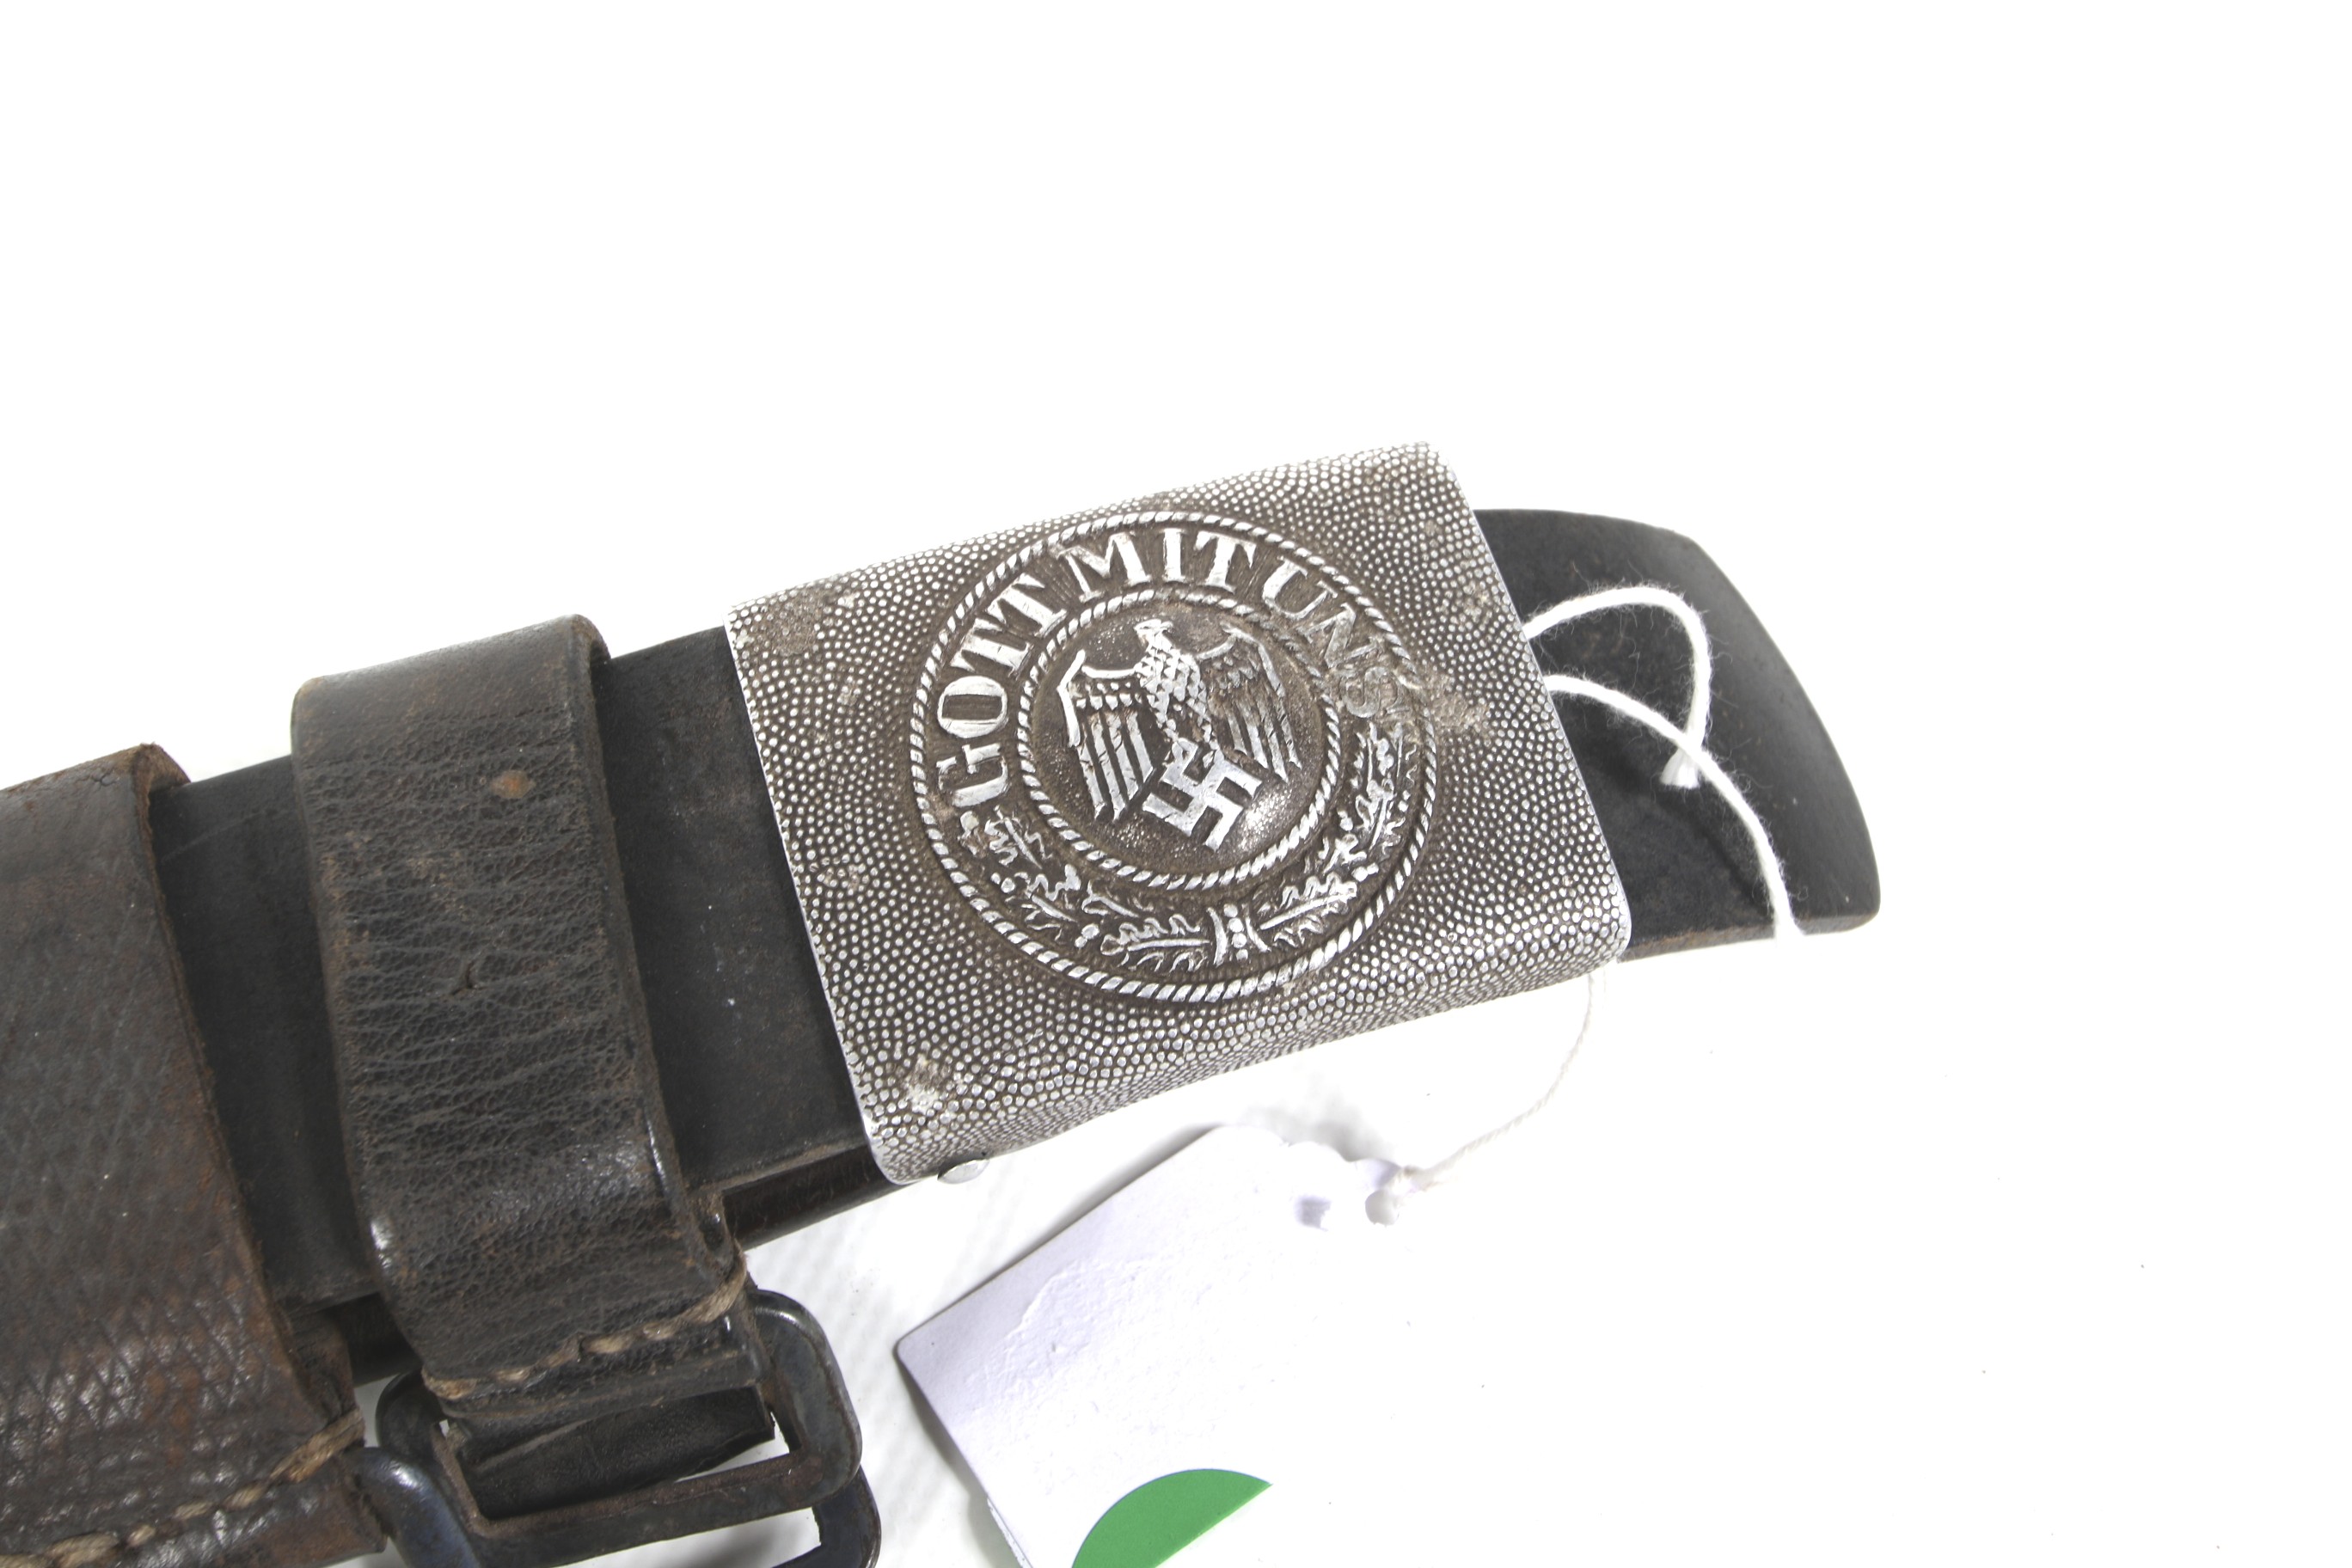 A WWII German army leather belt and buckle and a water bottle. - Image 3 of 5